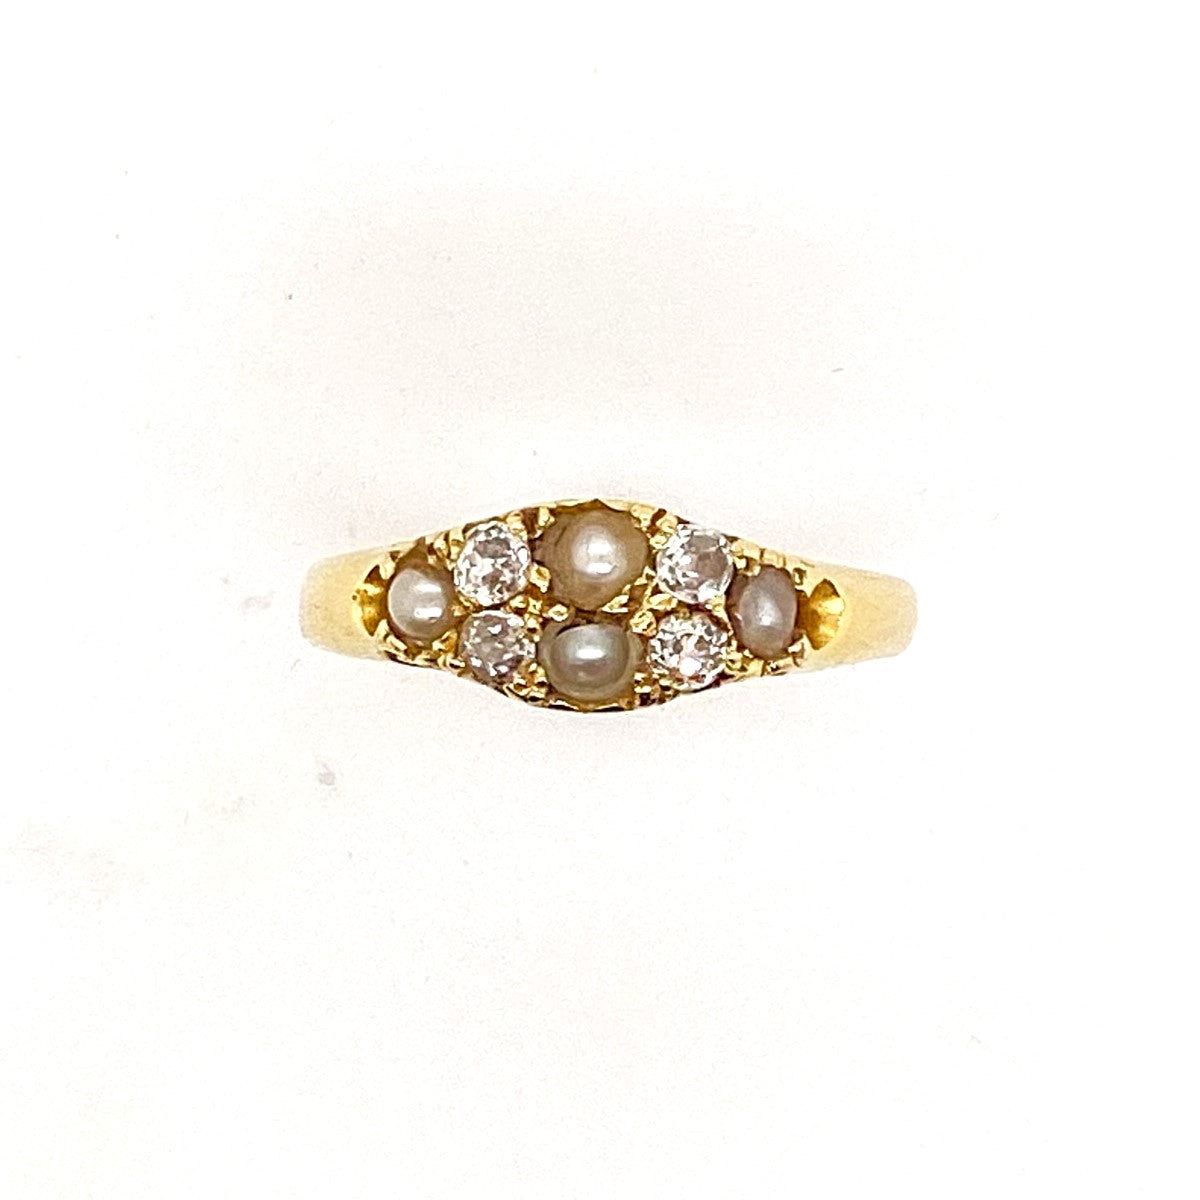 Lot 476 - Art Deco diamond and seed pearl ring with a